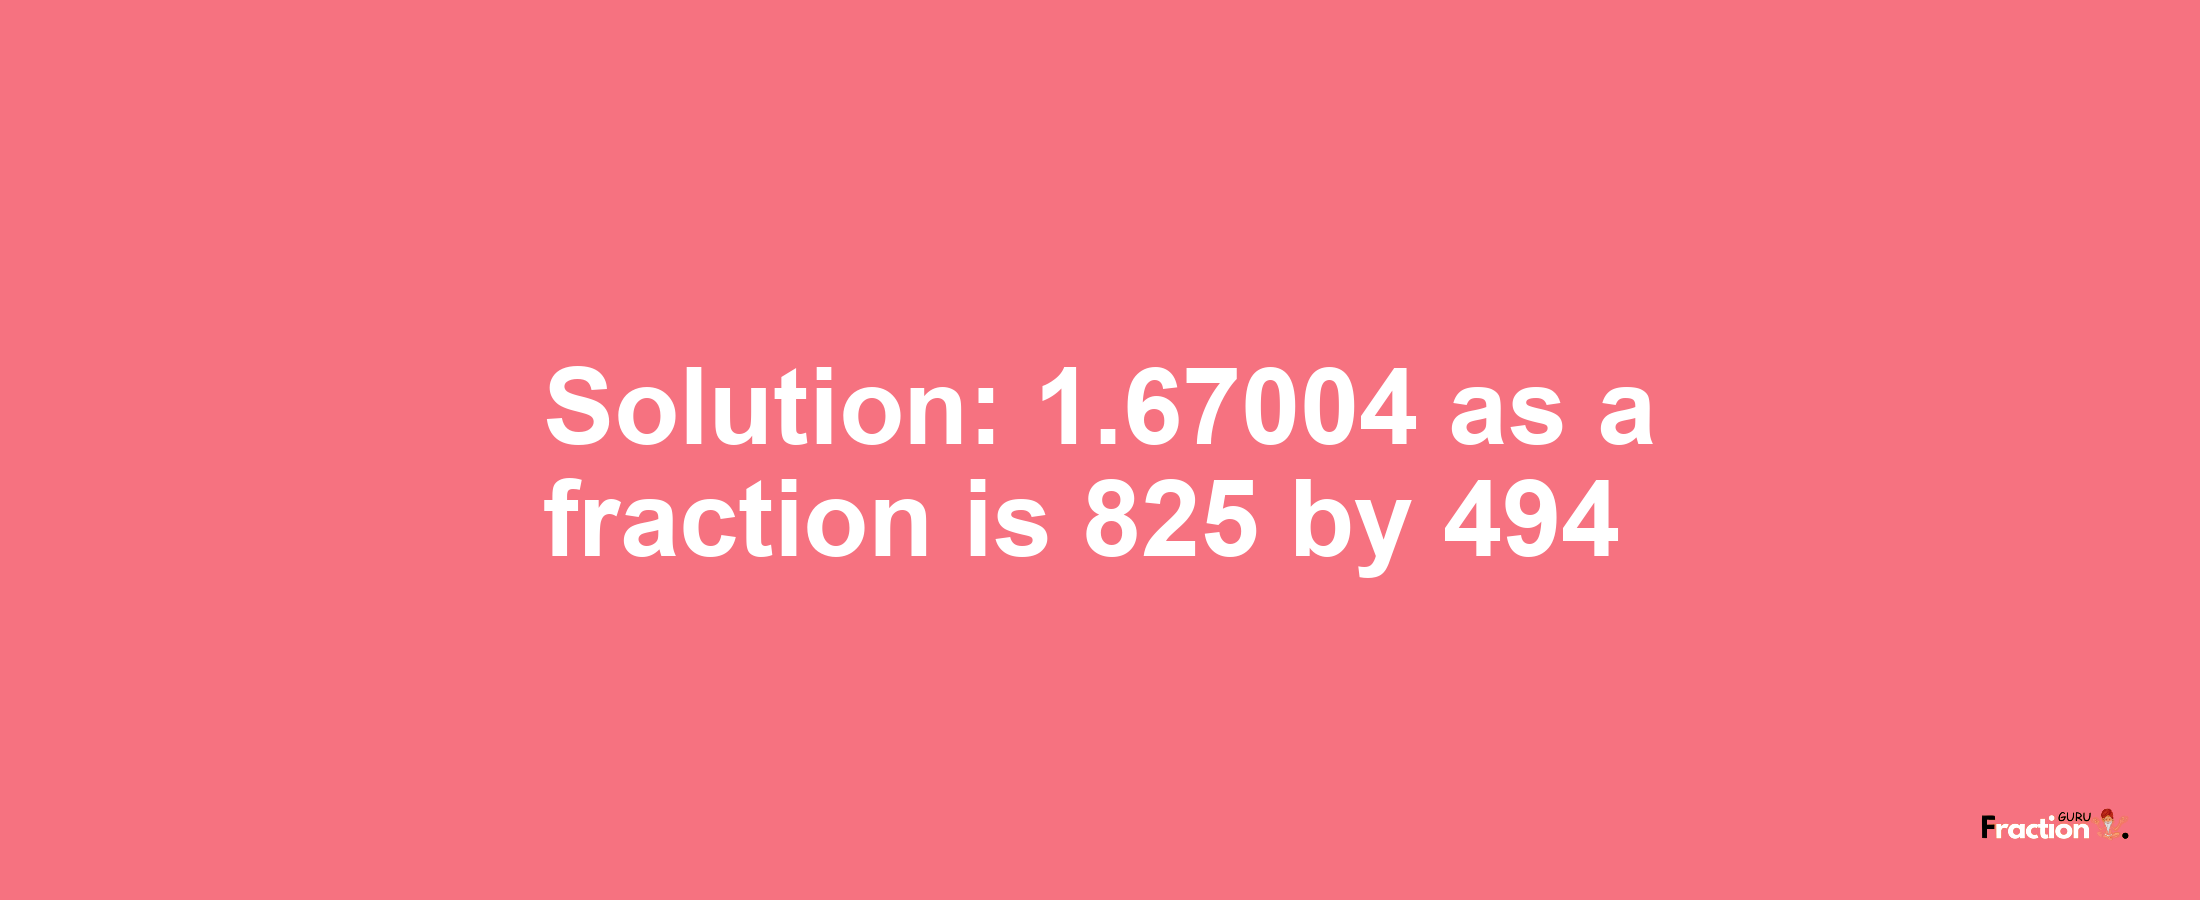 Solution:1.67004 as a fraction is 825/494